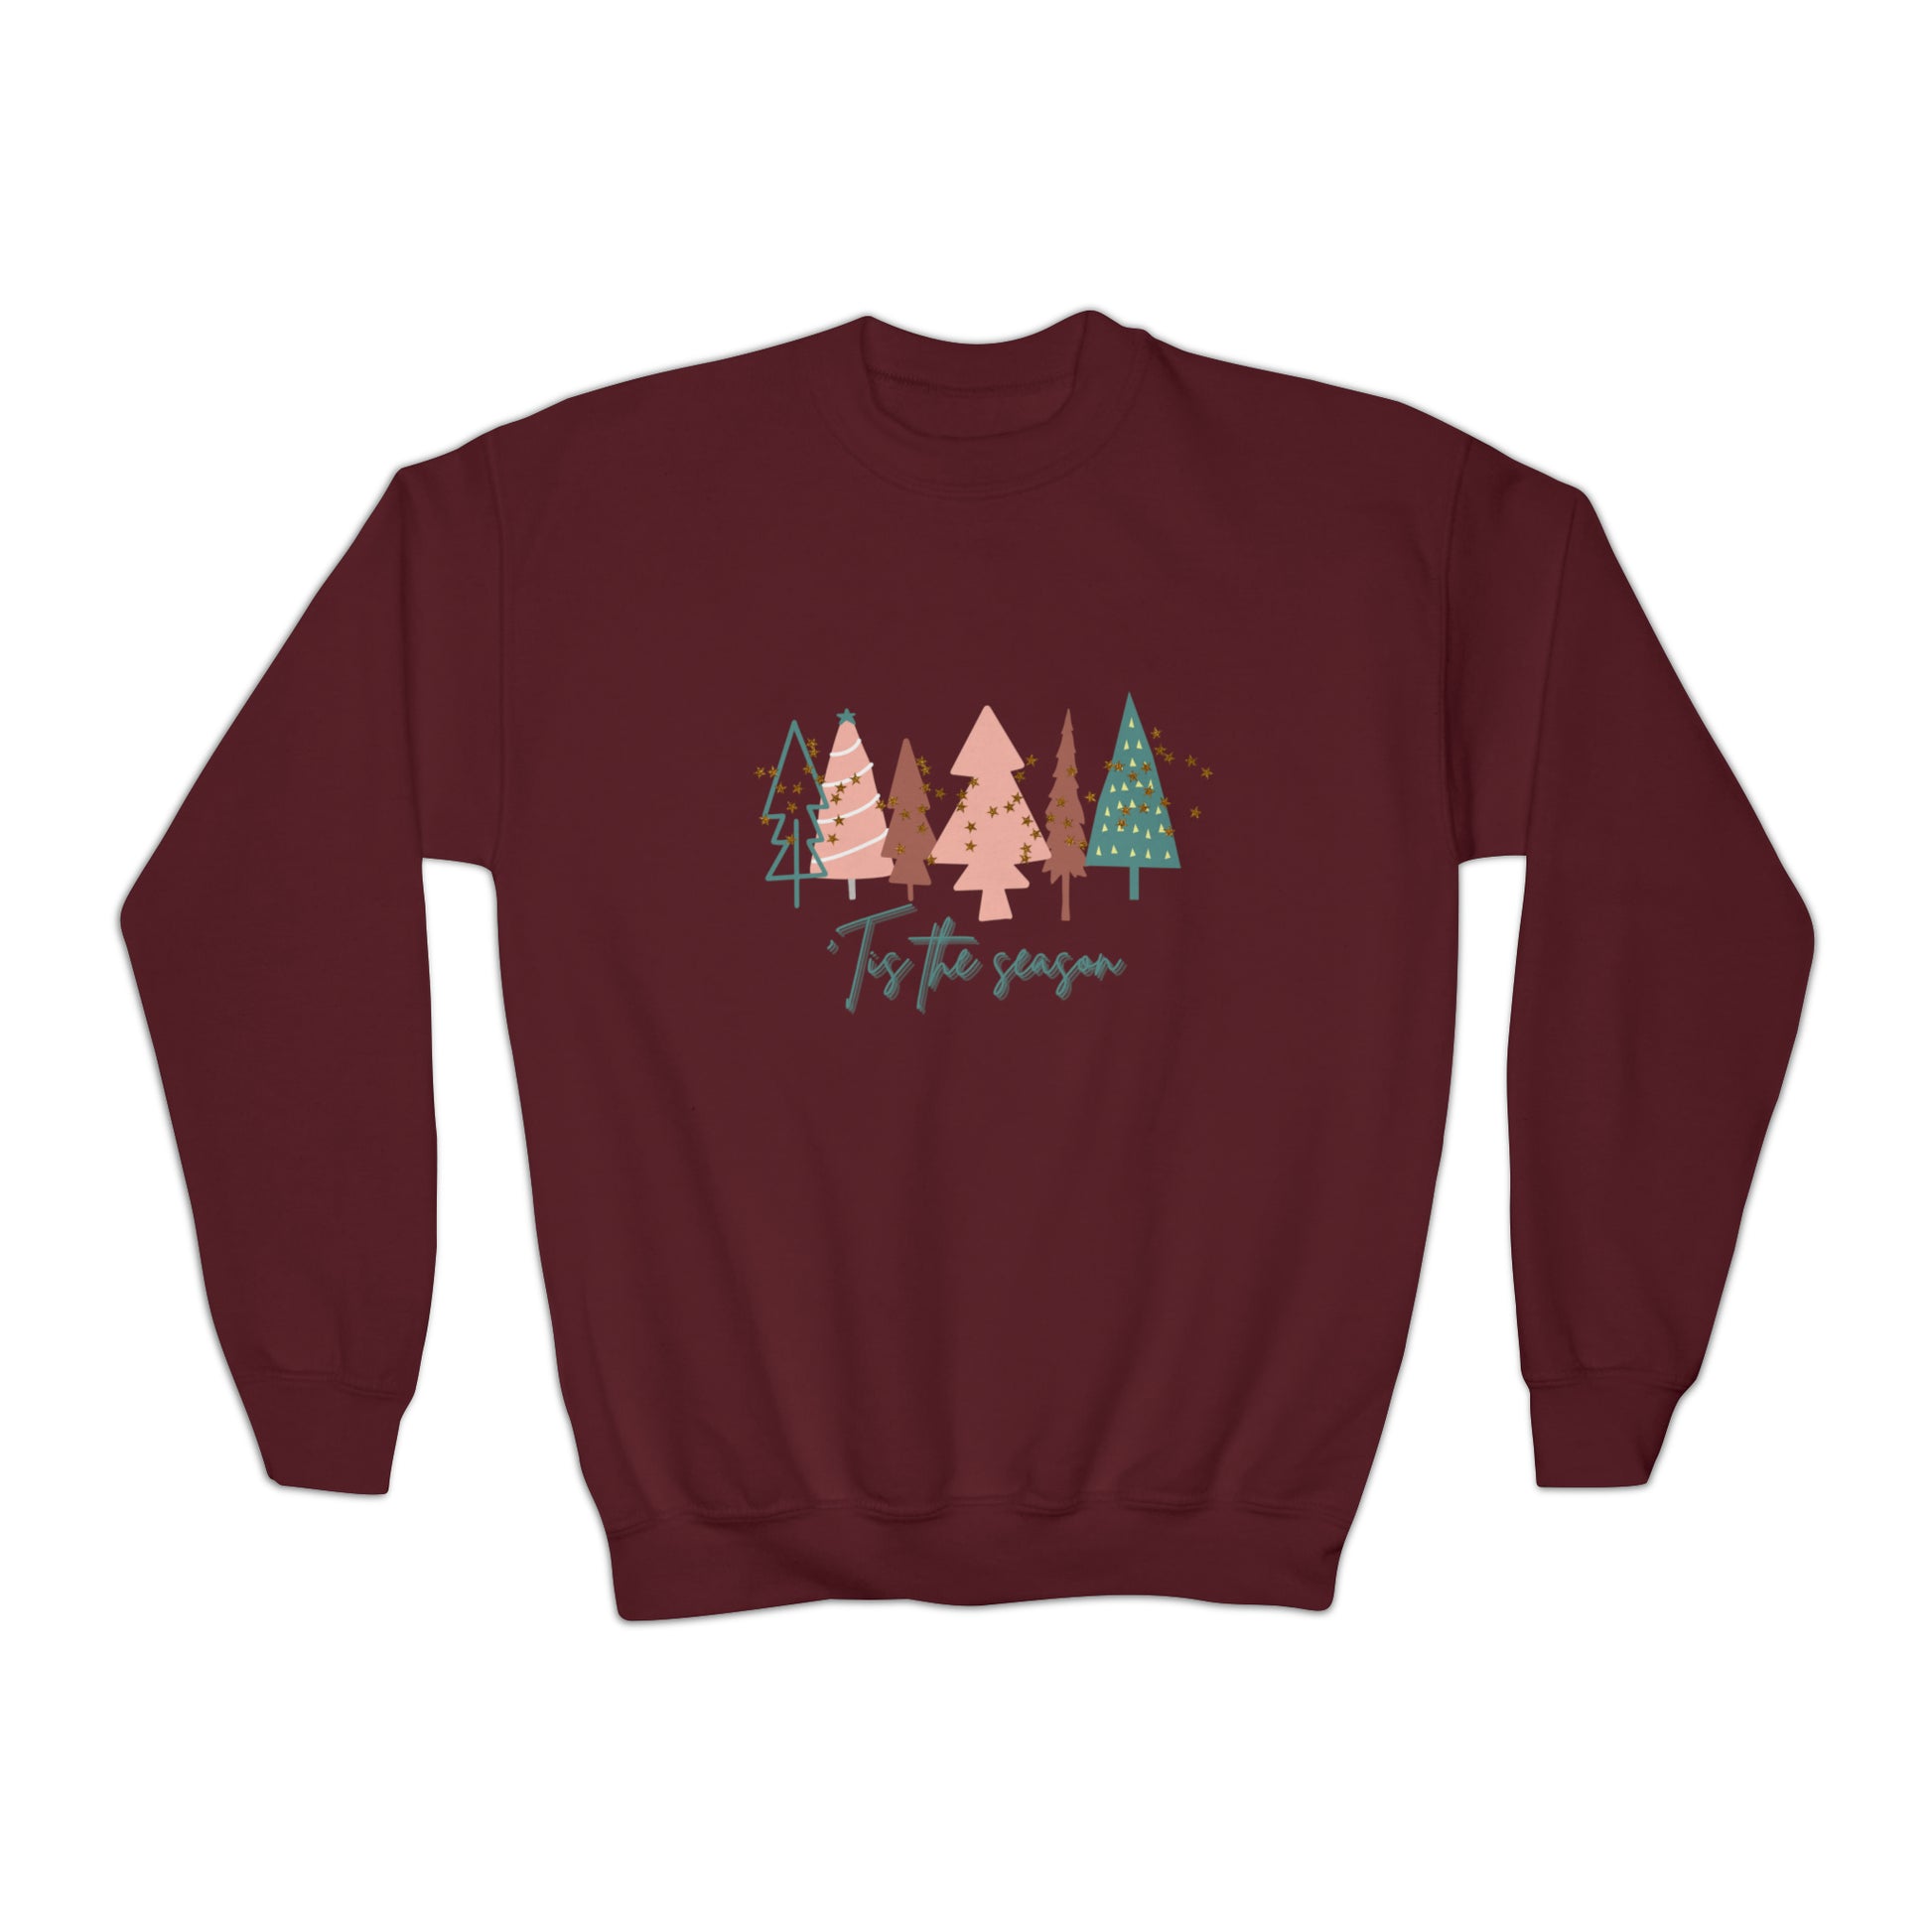 A cozy maroon Printify Christmas sweatshirt with the words "happy holiday" on it.